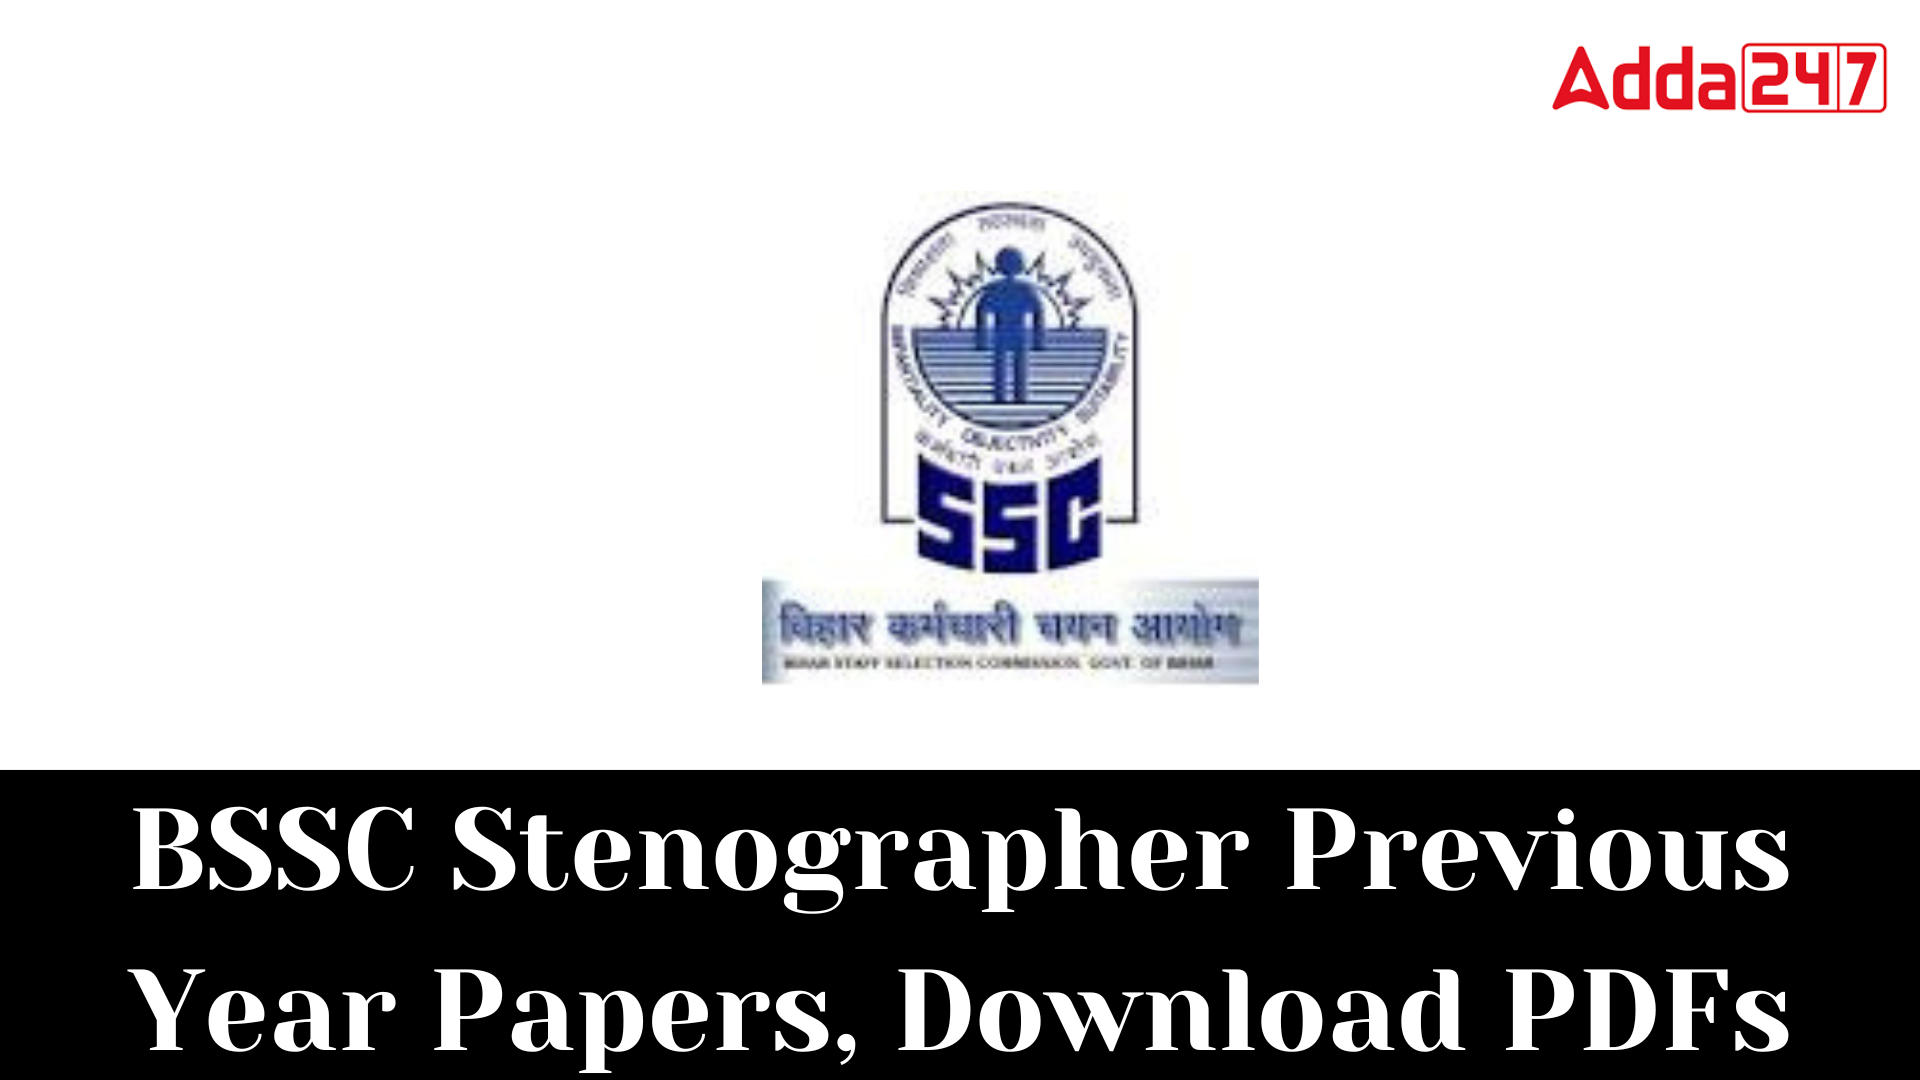 BSSC Stenographer Previous Year Papers, Download PDFs